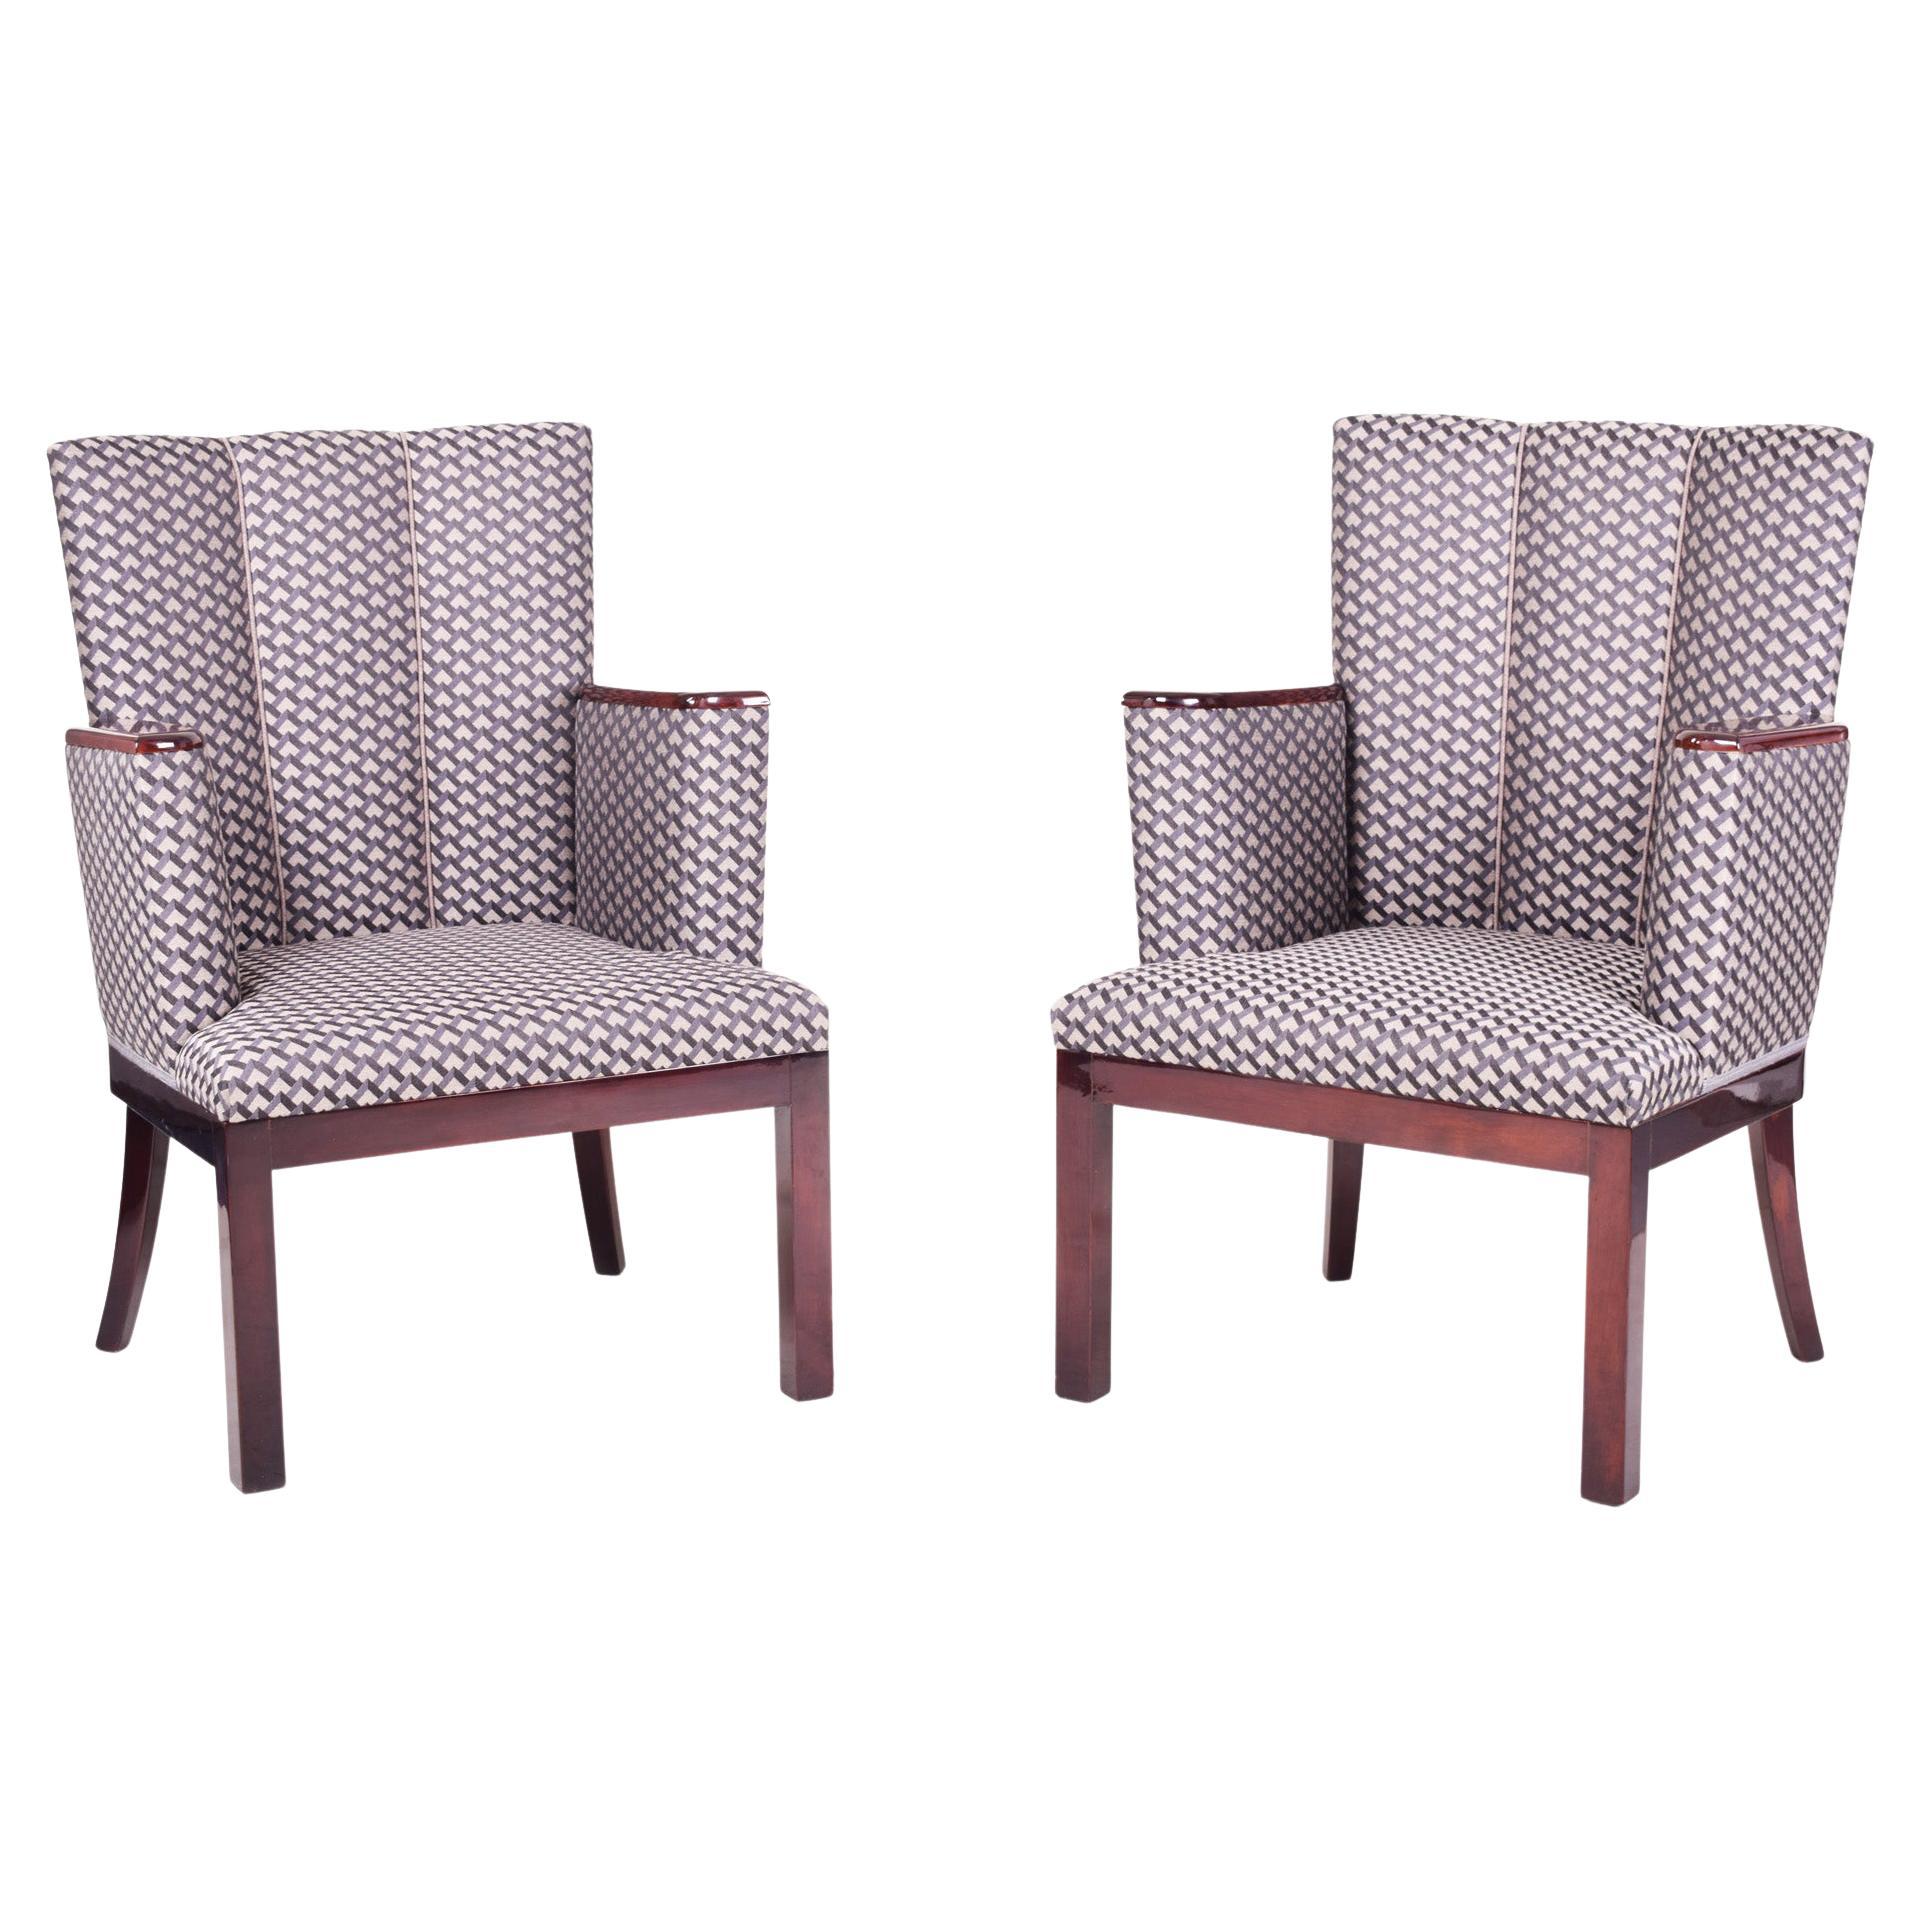 Pair of Mahogany Art Deco Armchairs, Made in France, Fully Restored, 1920-1929 For Sale